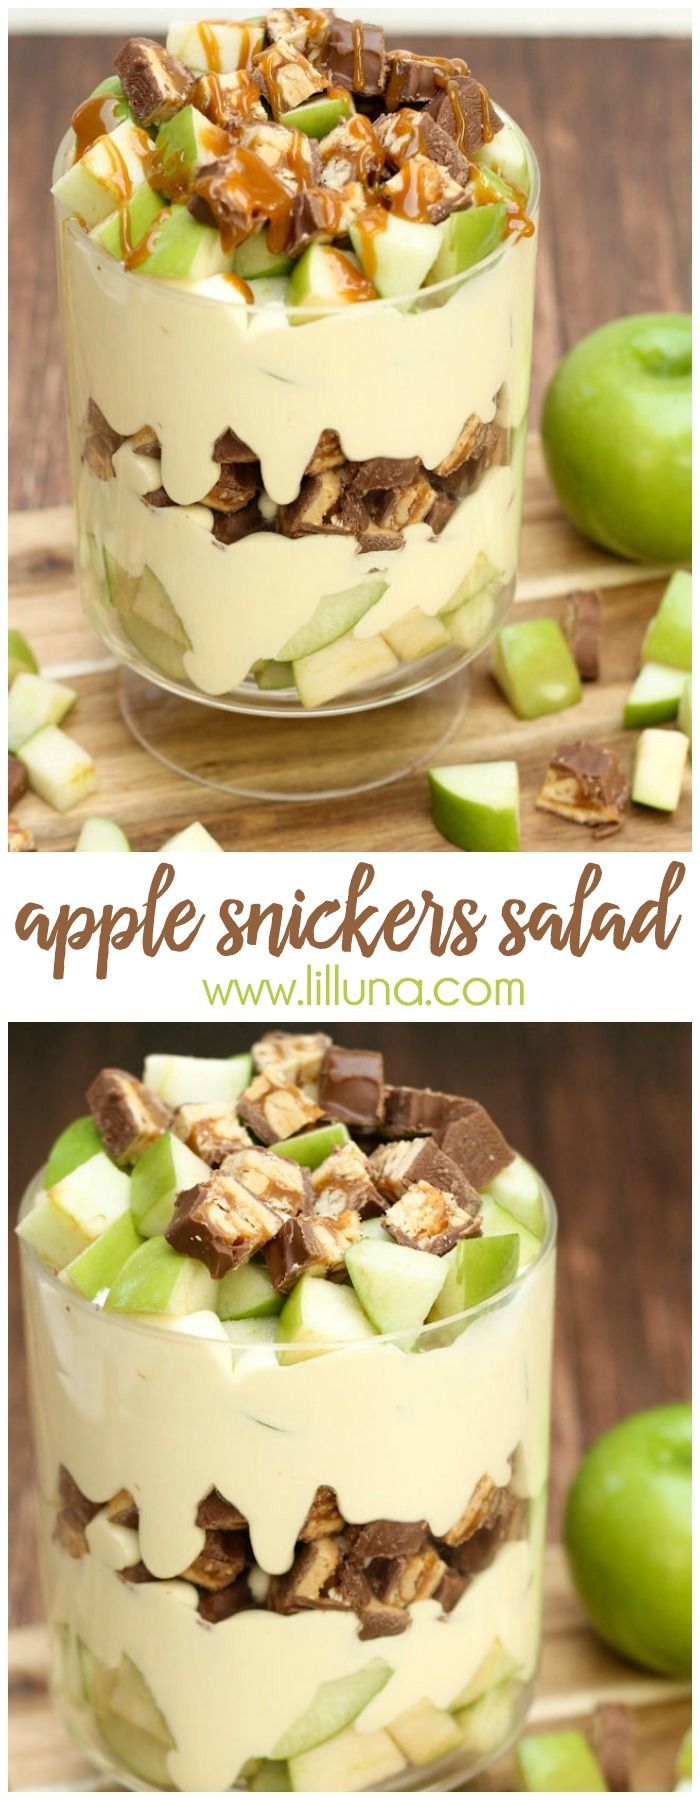 Wouldn’t this be fun to try in the Fall when apples are so nice and crisp???      apple-snickers-salad-col